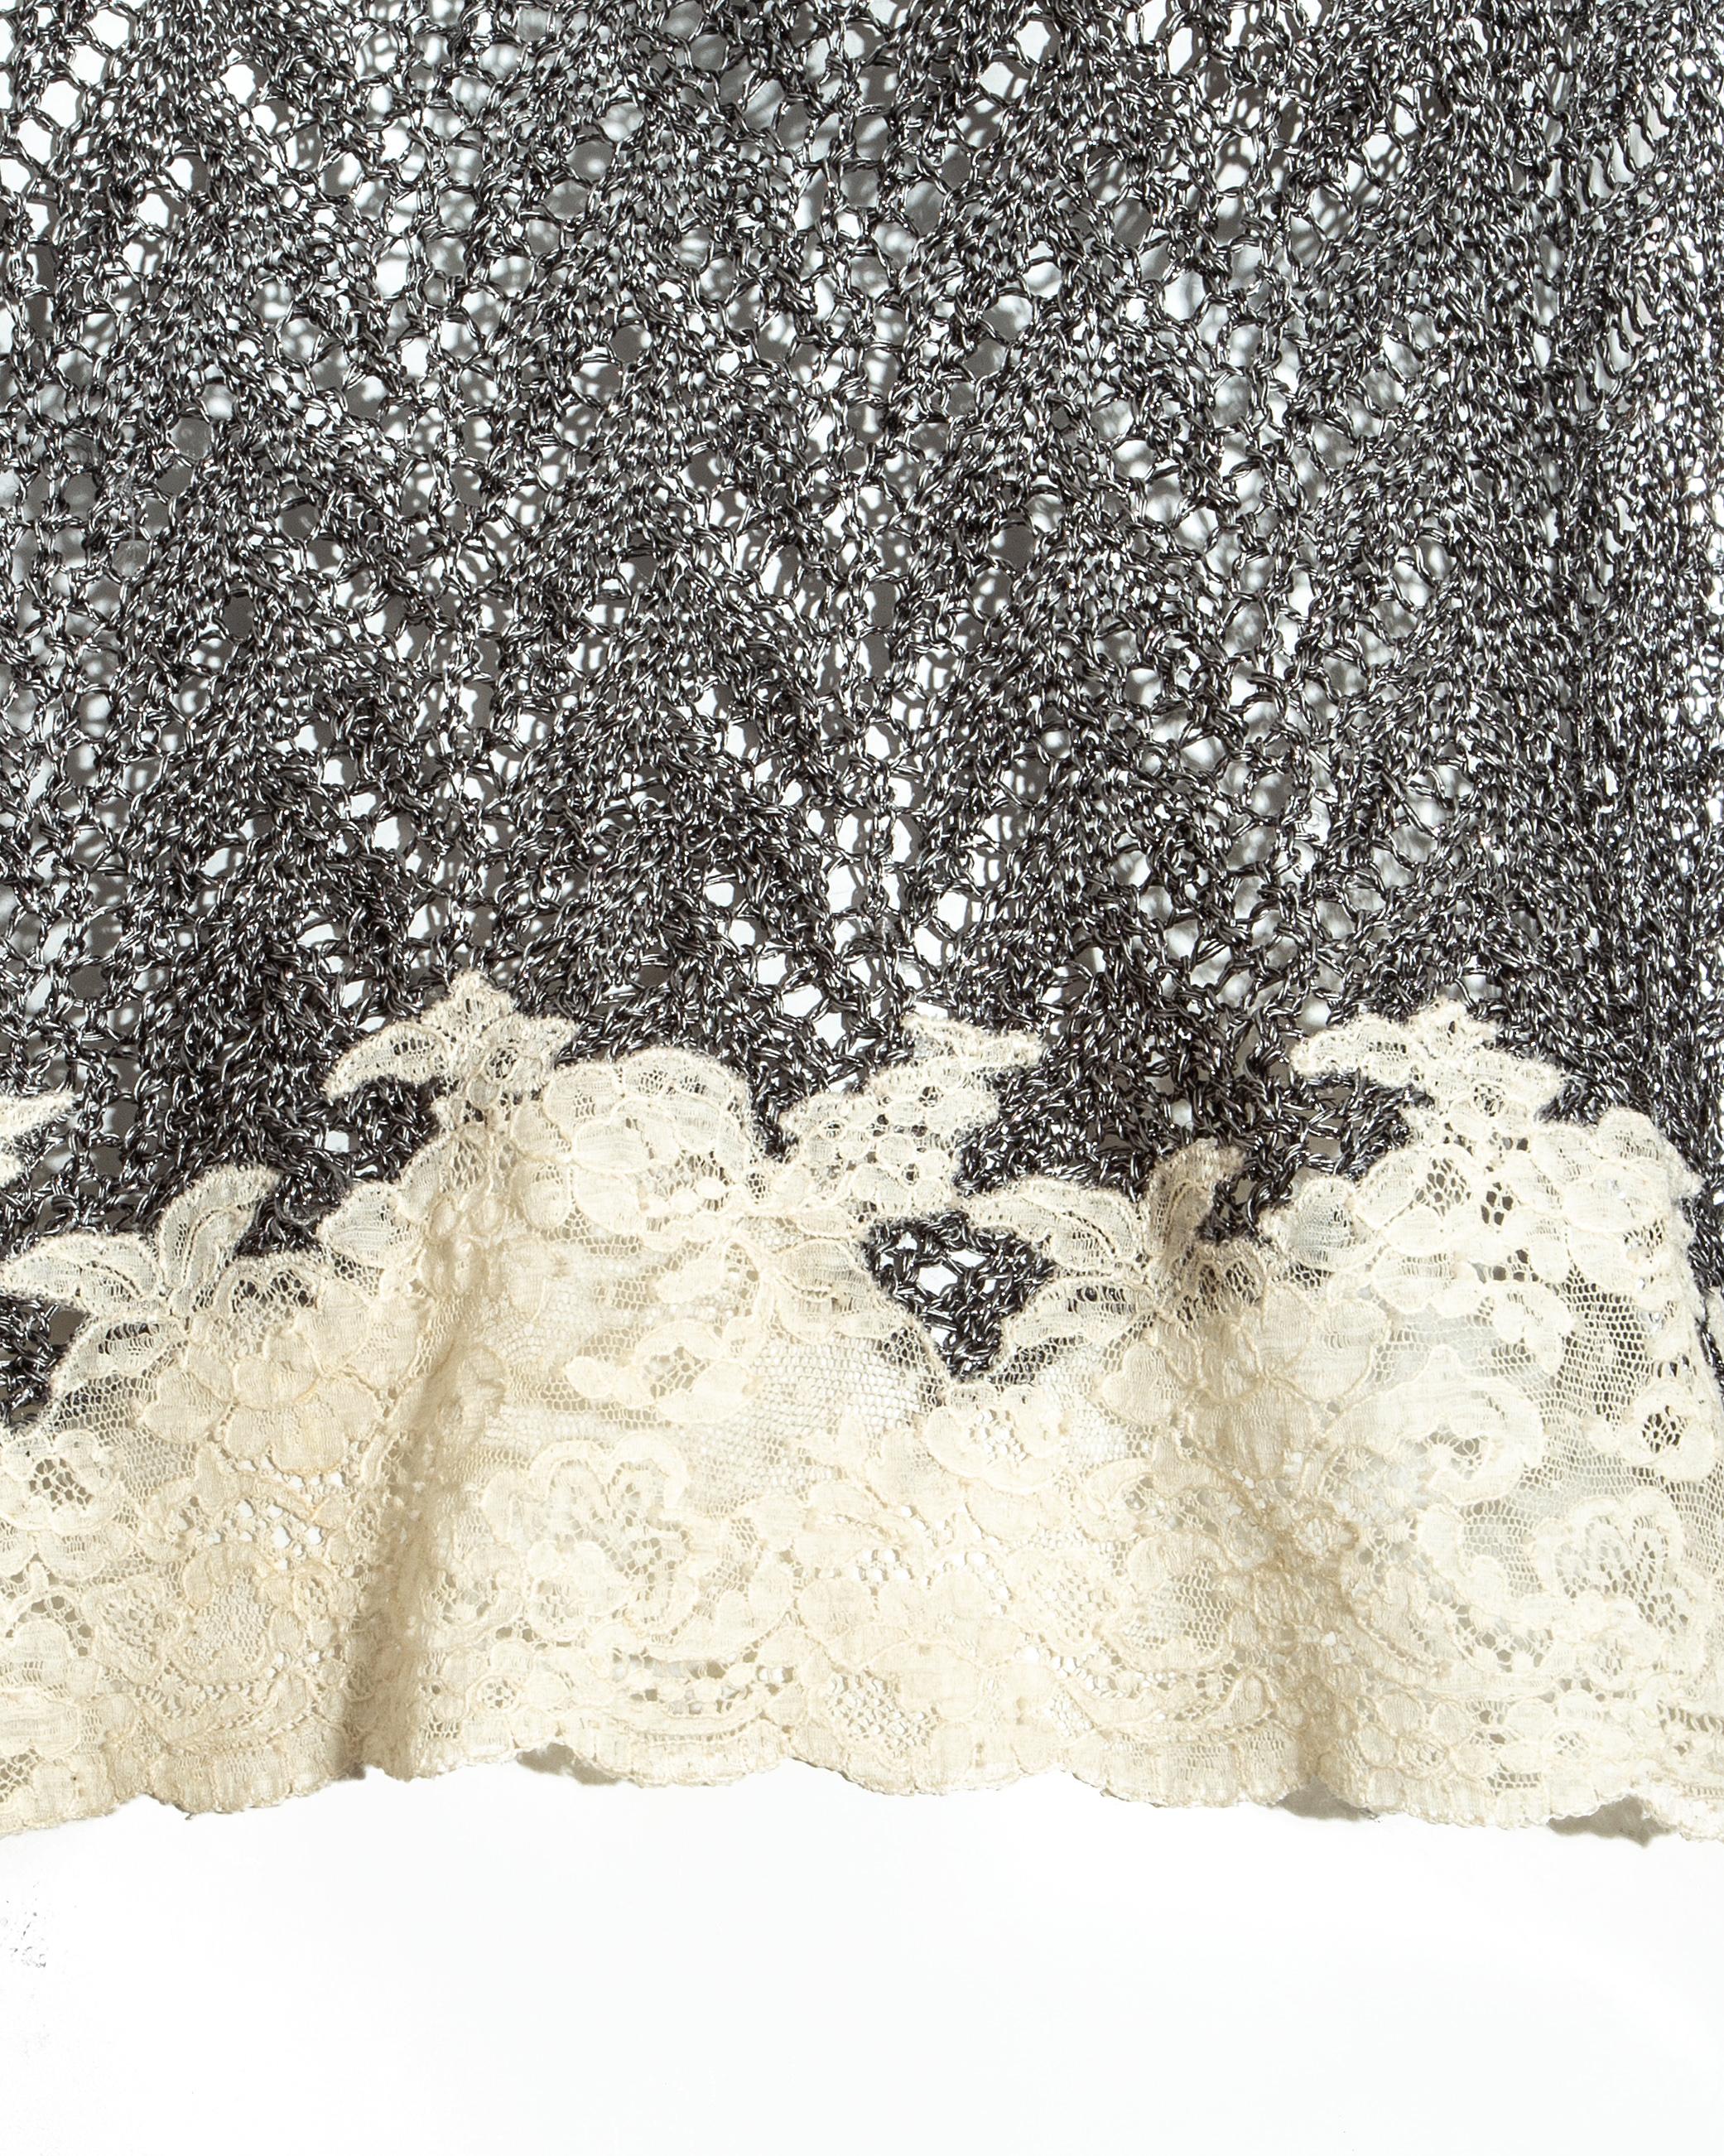 Silver Christian Dior silver crochet knit sweater with cream lace, fw 1998